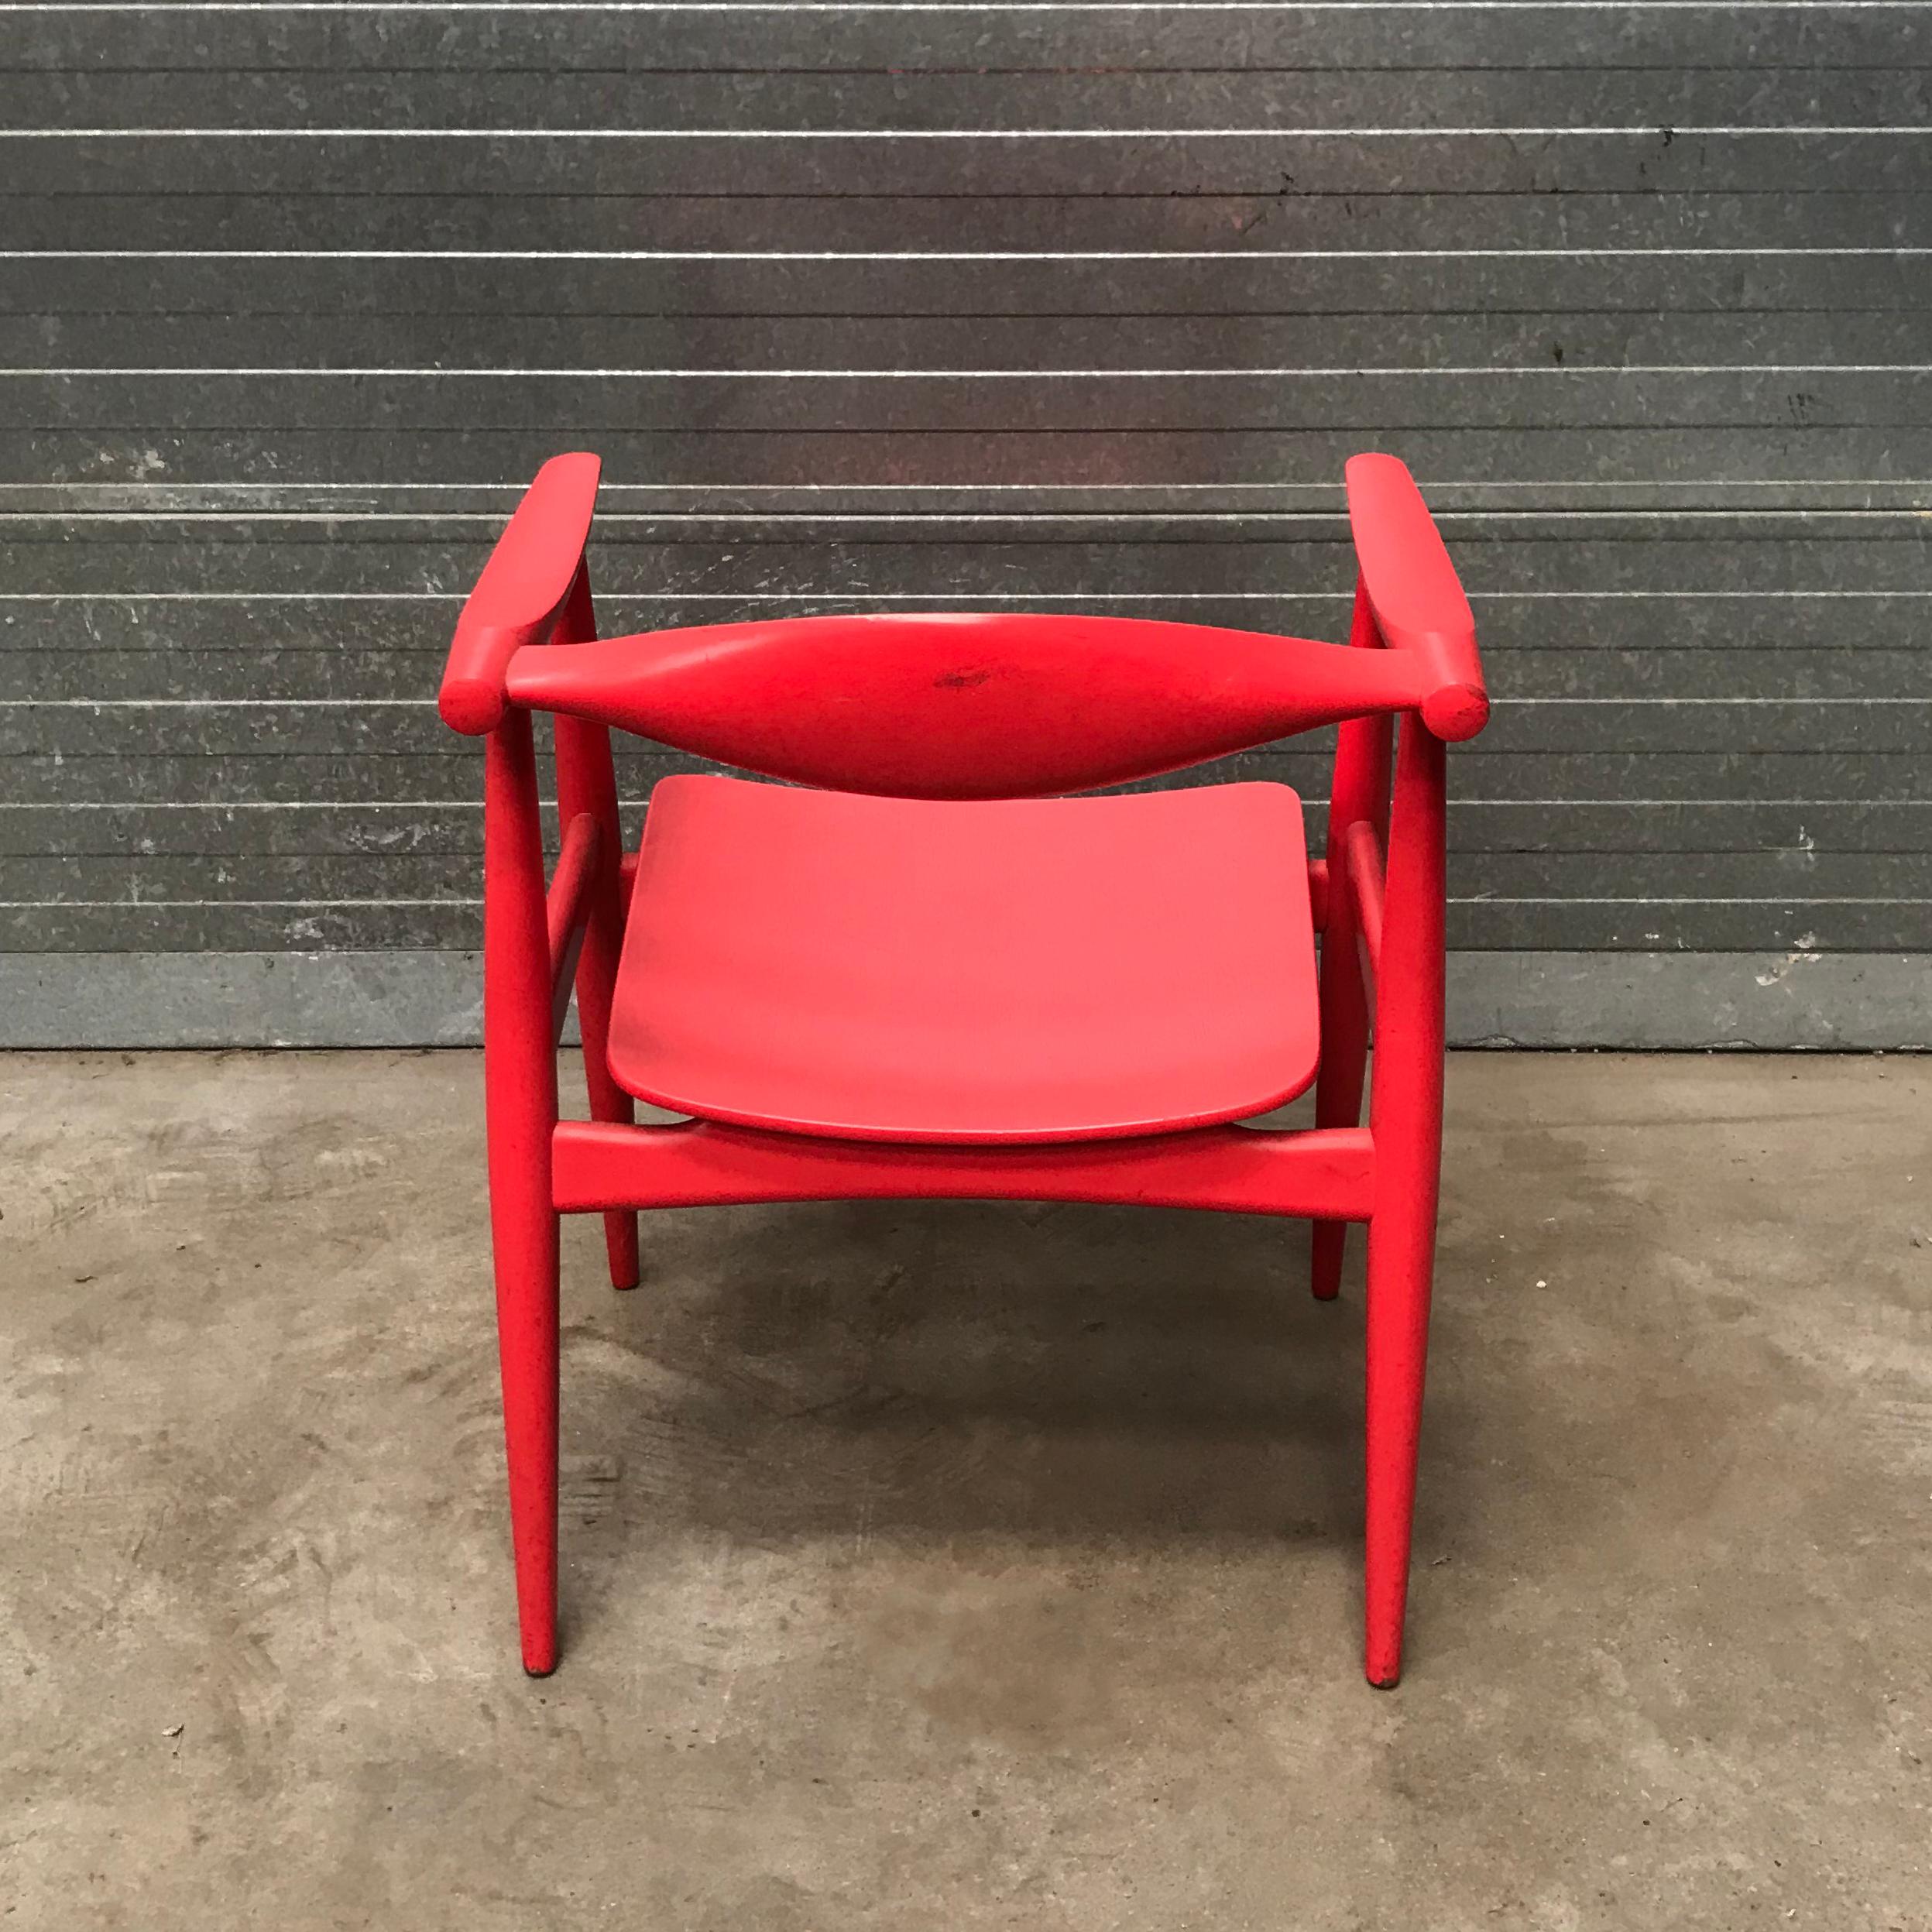 Very Rare Wegner Side Chair in Originally Red Painted Wood, circa 1930 For Sale 4